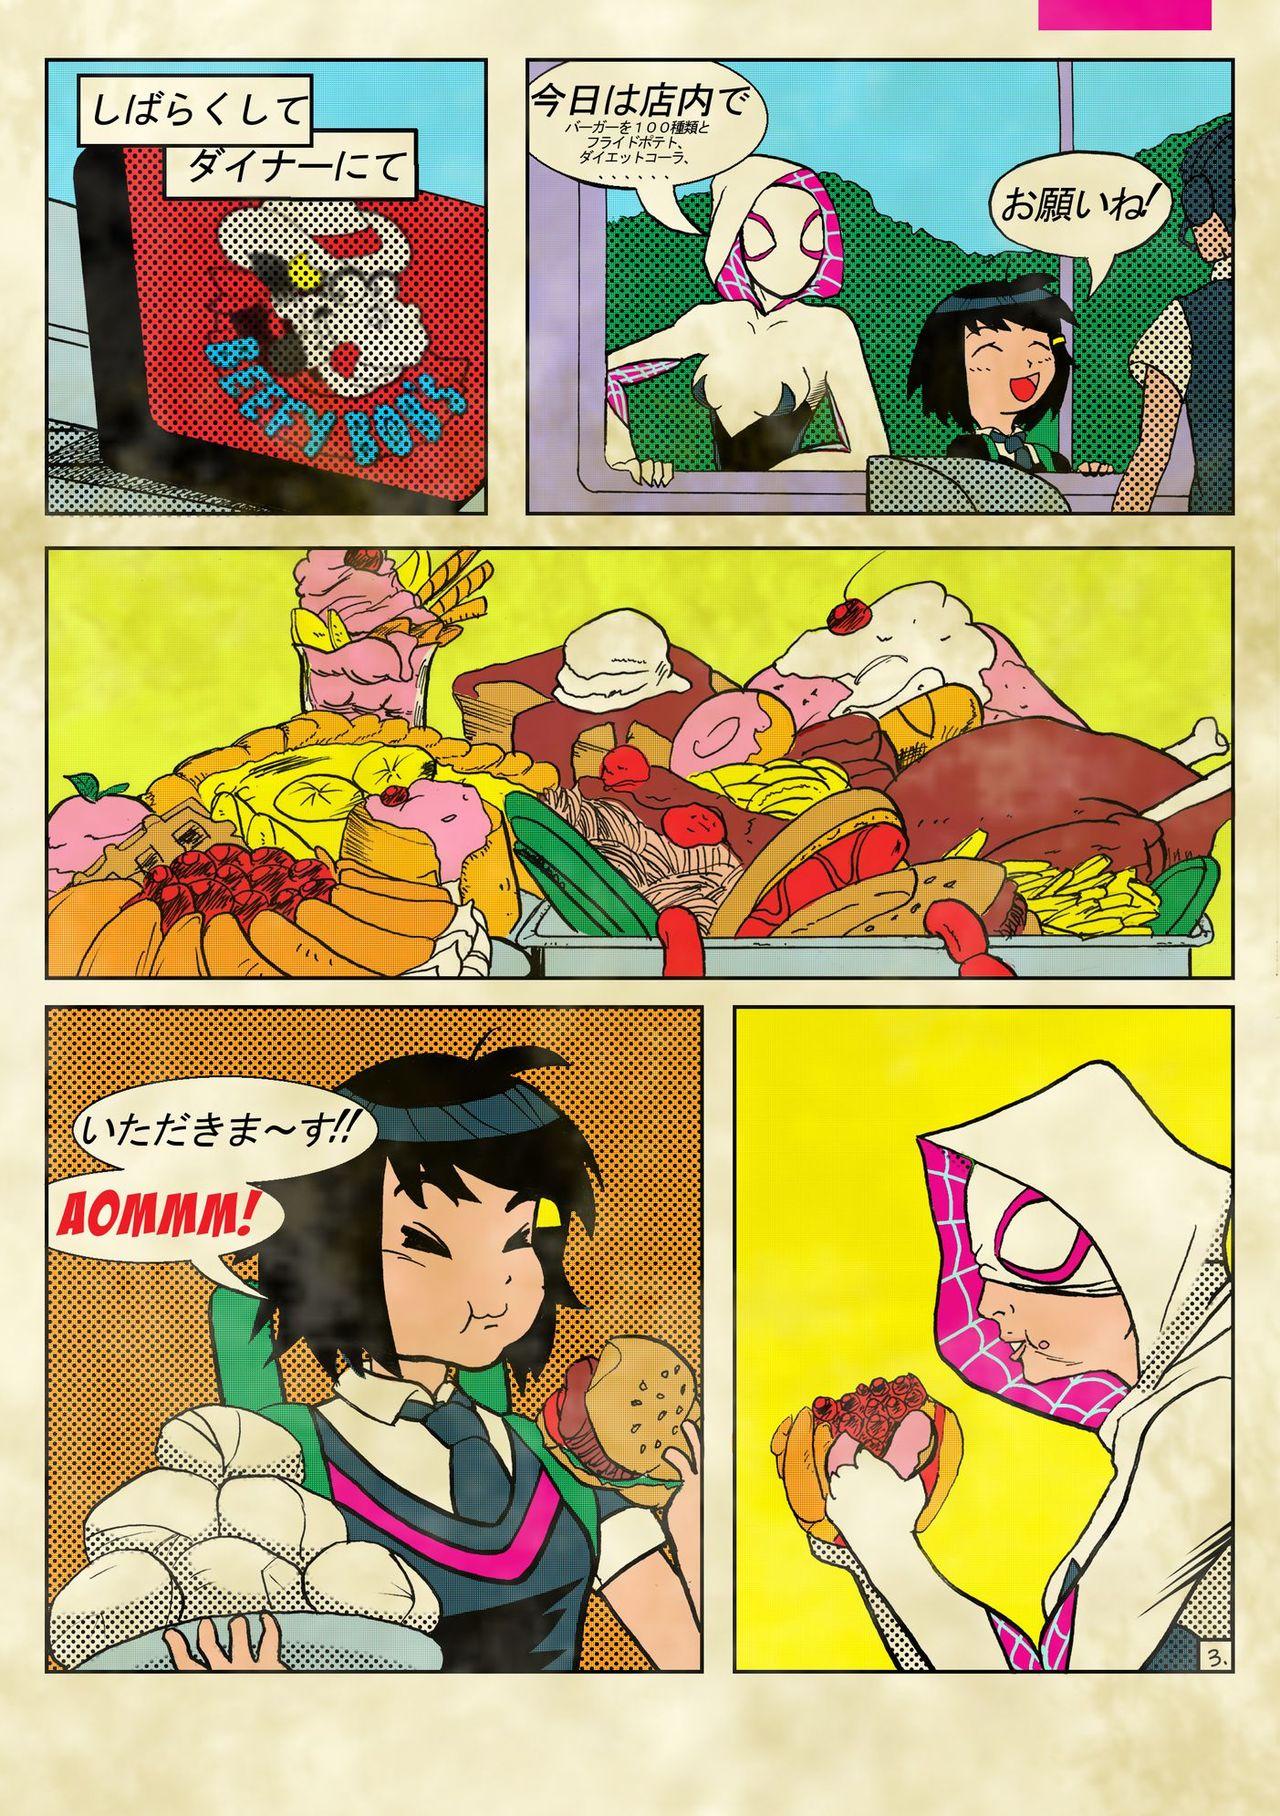 Flashing Fat Bless You!! - Spider-man Vietnamese - Page 4